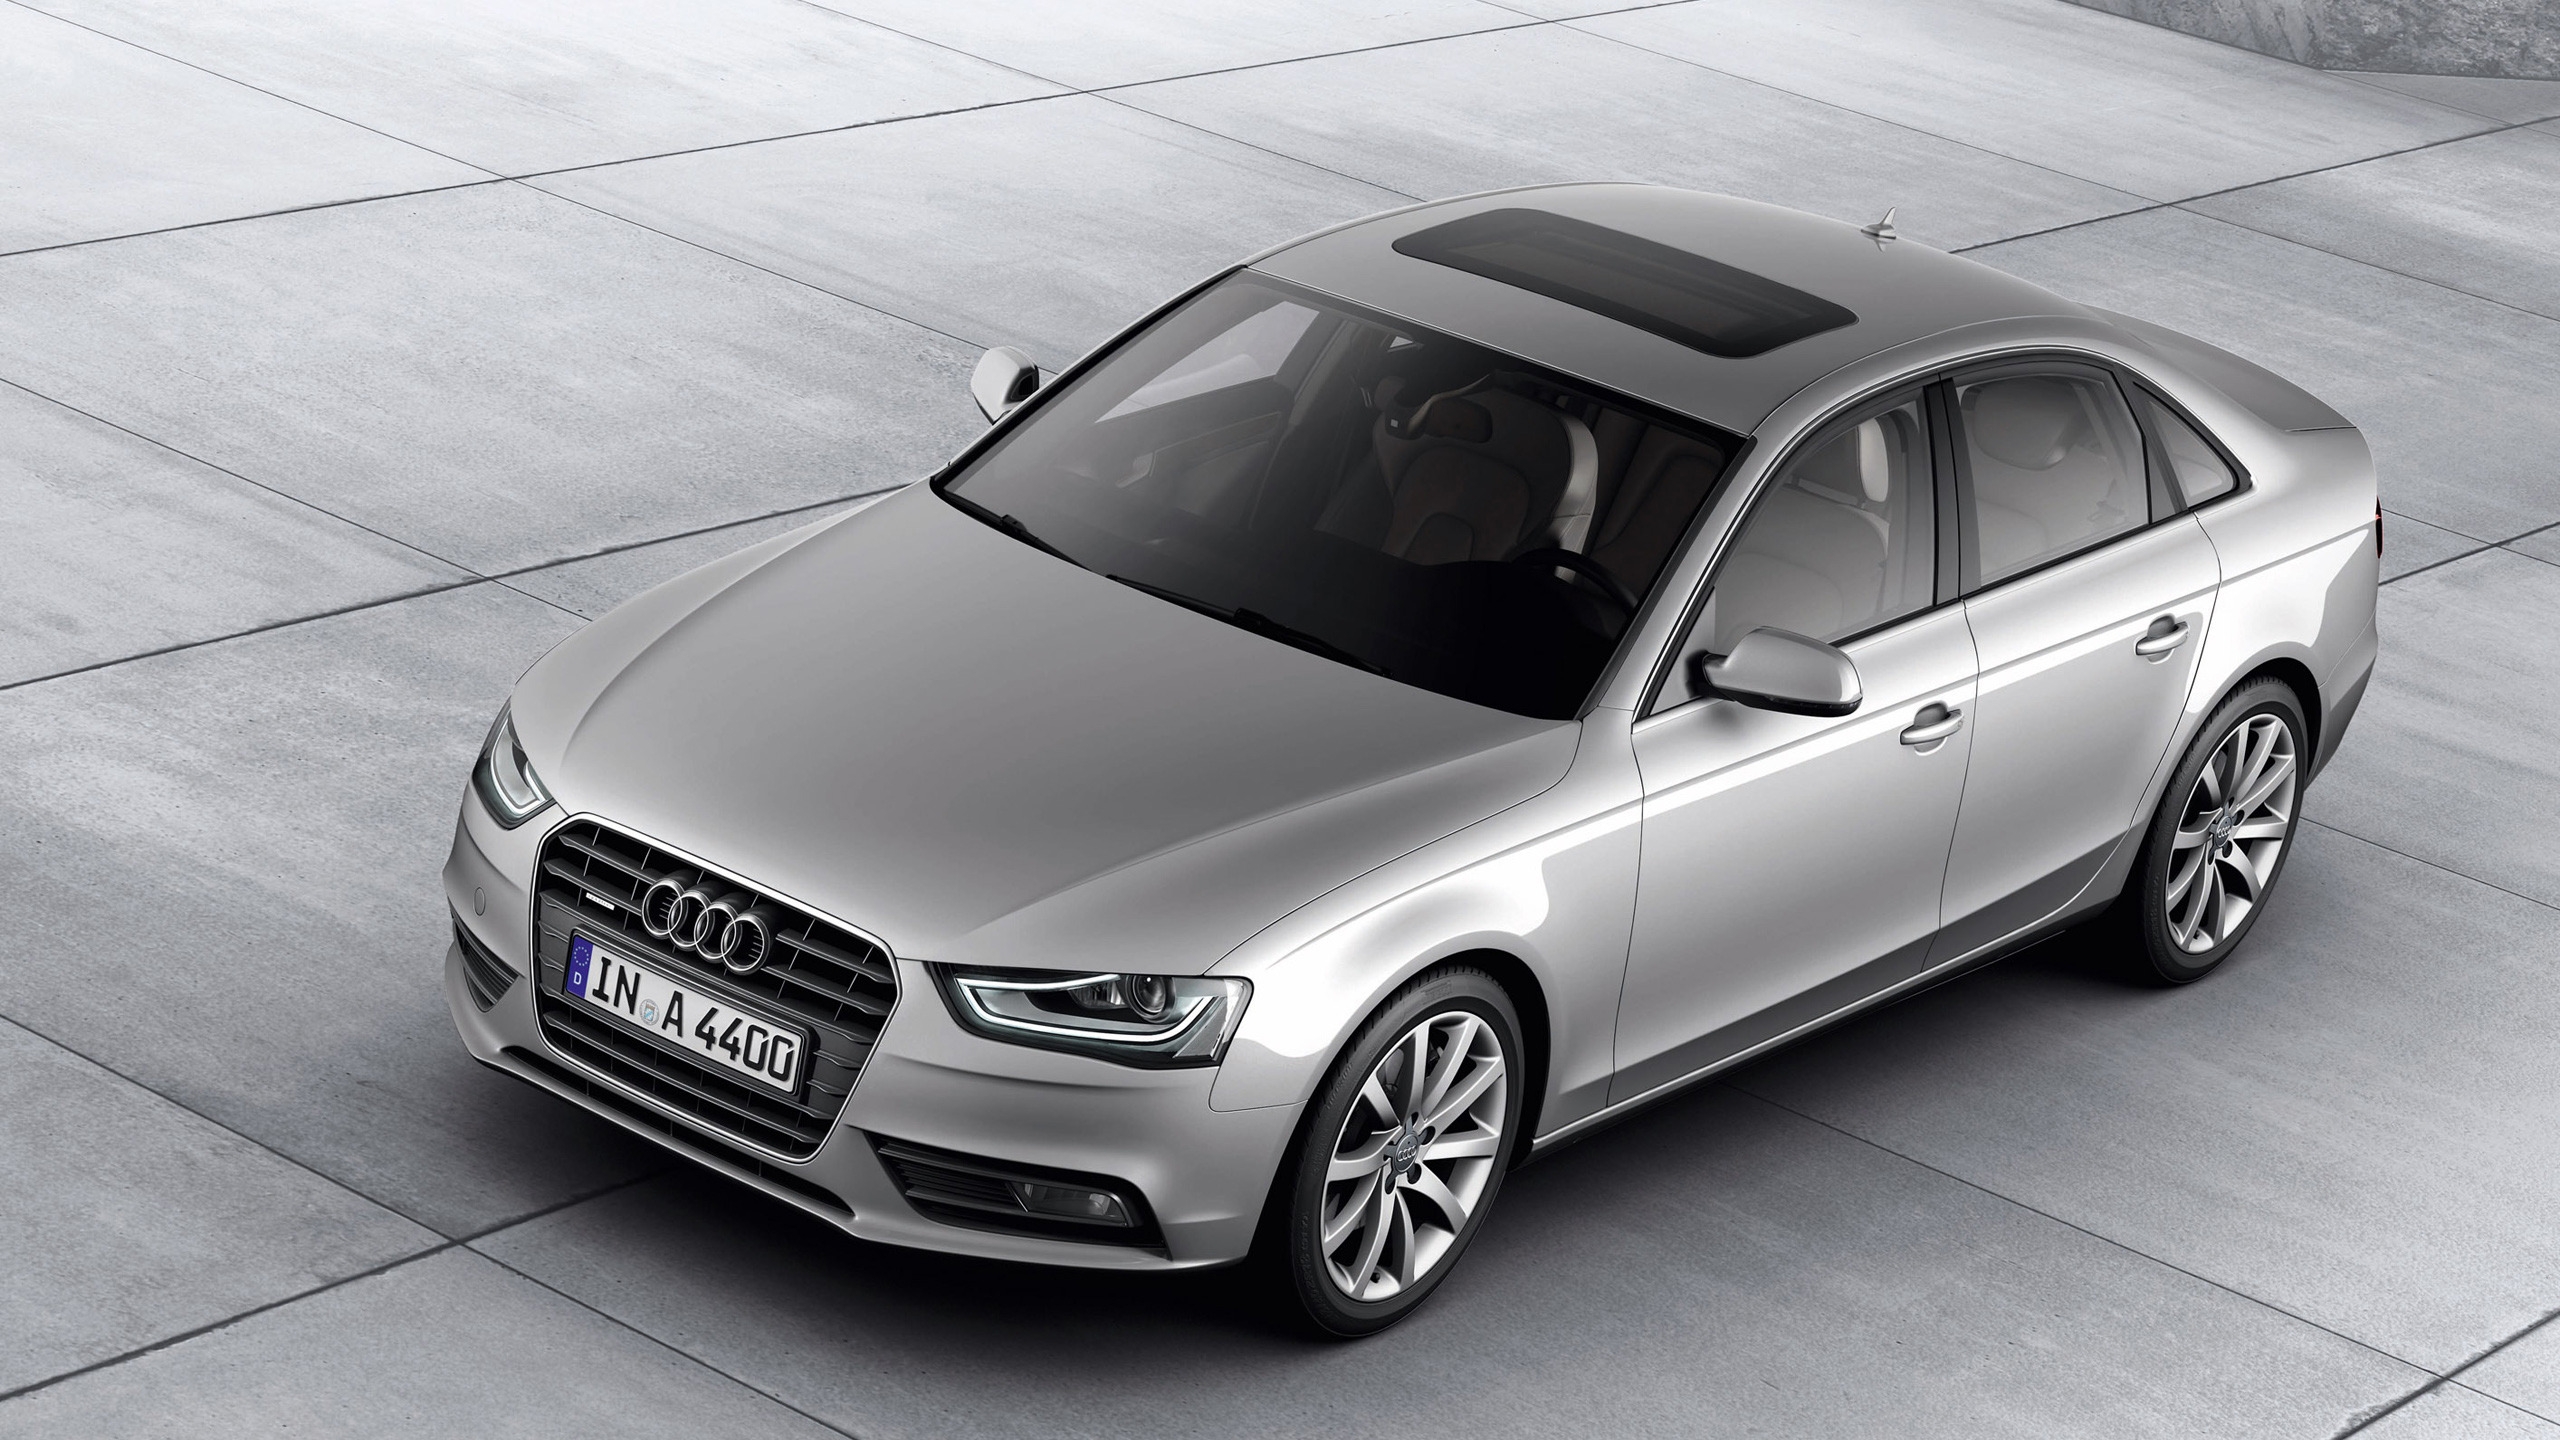 2012 Audi A4 for 2560x1440 HDTV resolution